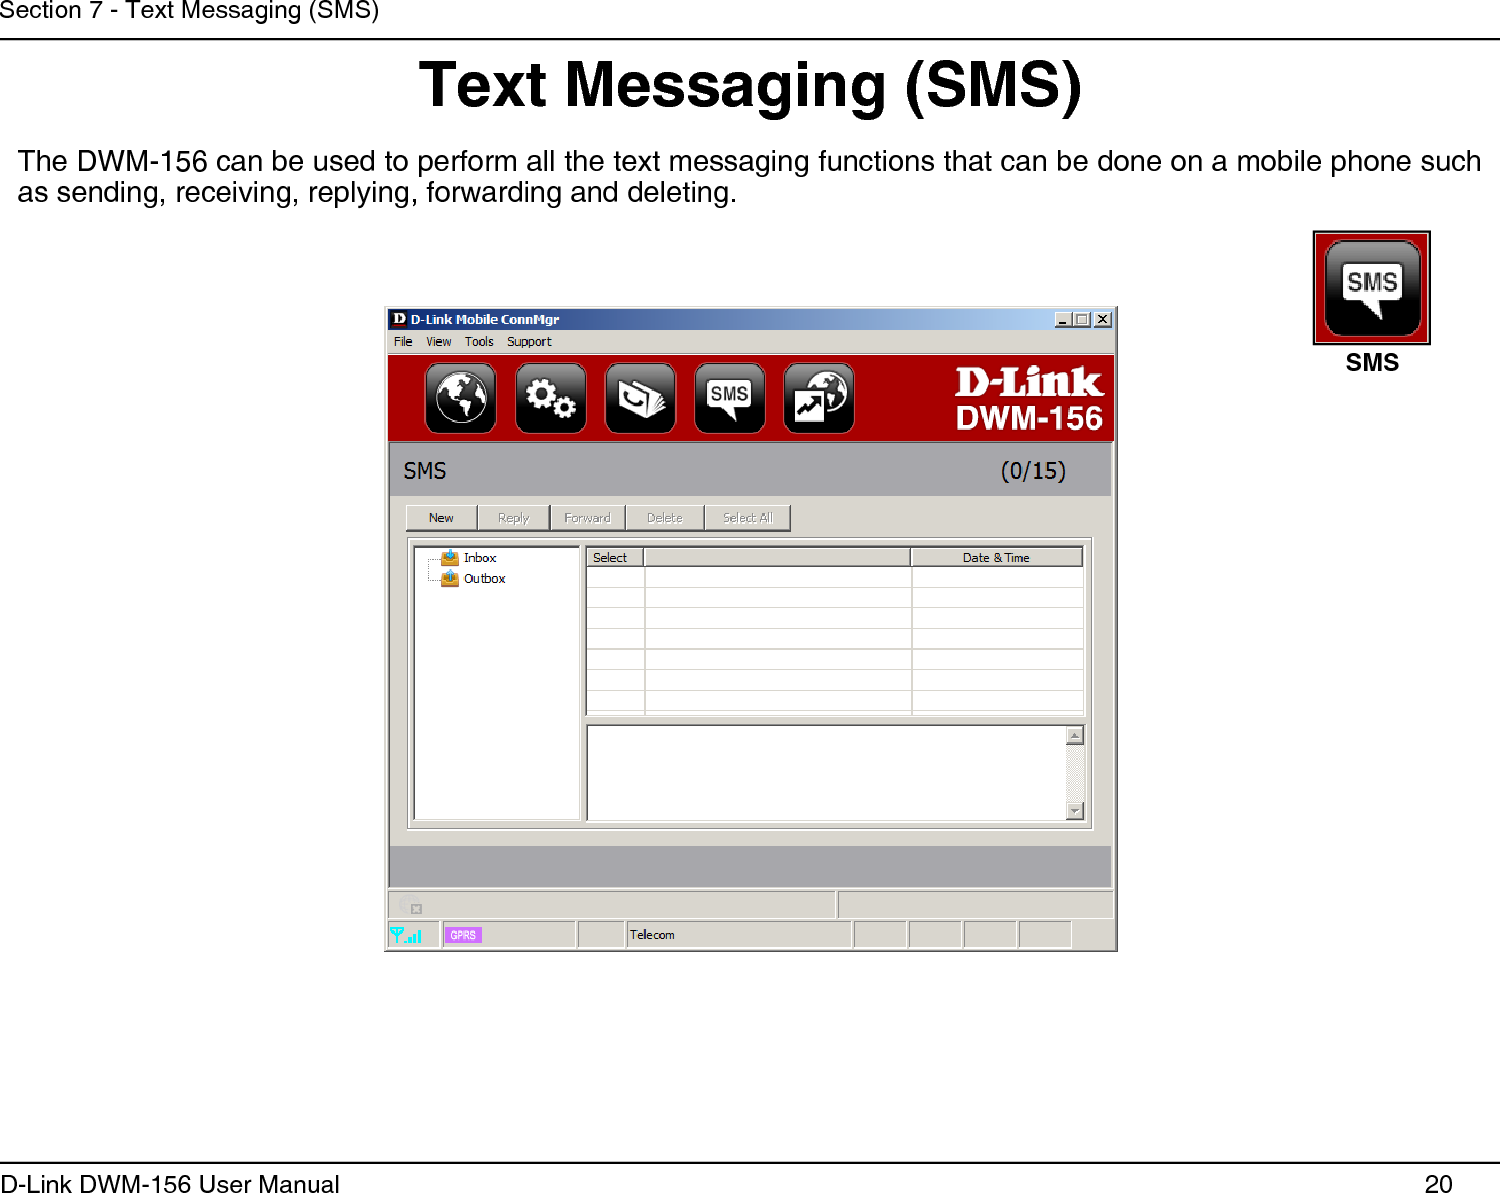 20D-Link DWM-156 User ManualSection 7 - Text Messaging (SMS)Text Messaging (SMS)The DWM-156 can be used to perform all the text messaging functions that can be done on a mobile phone such as sending, receiving, replying, forwarding and deleting.SMS